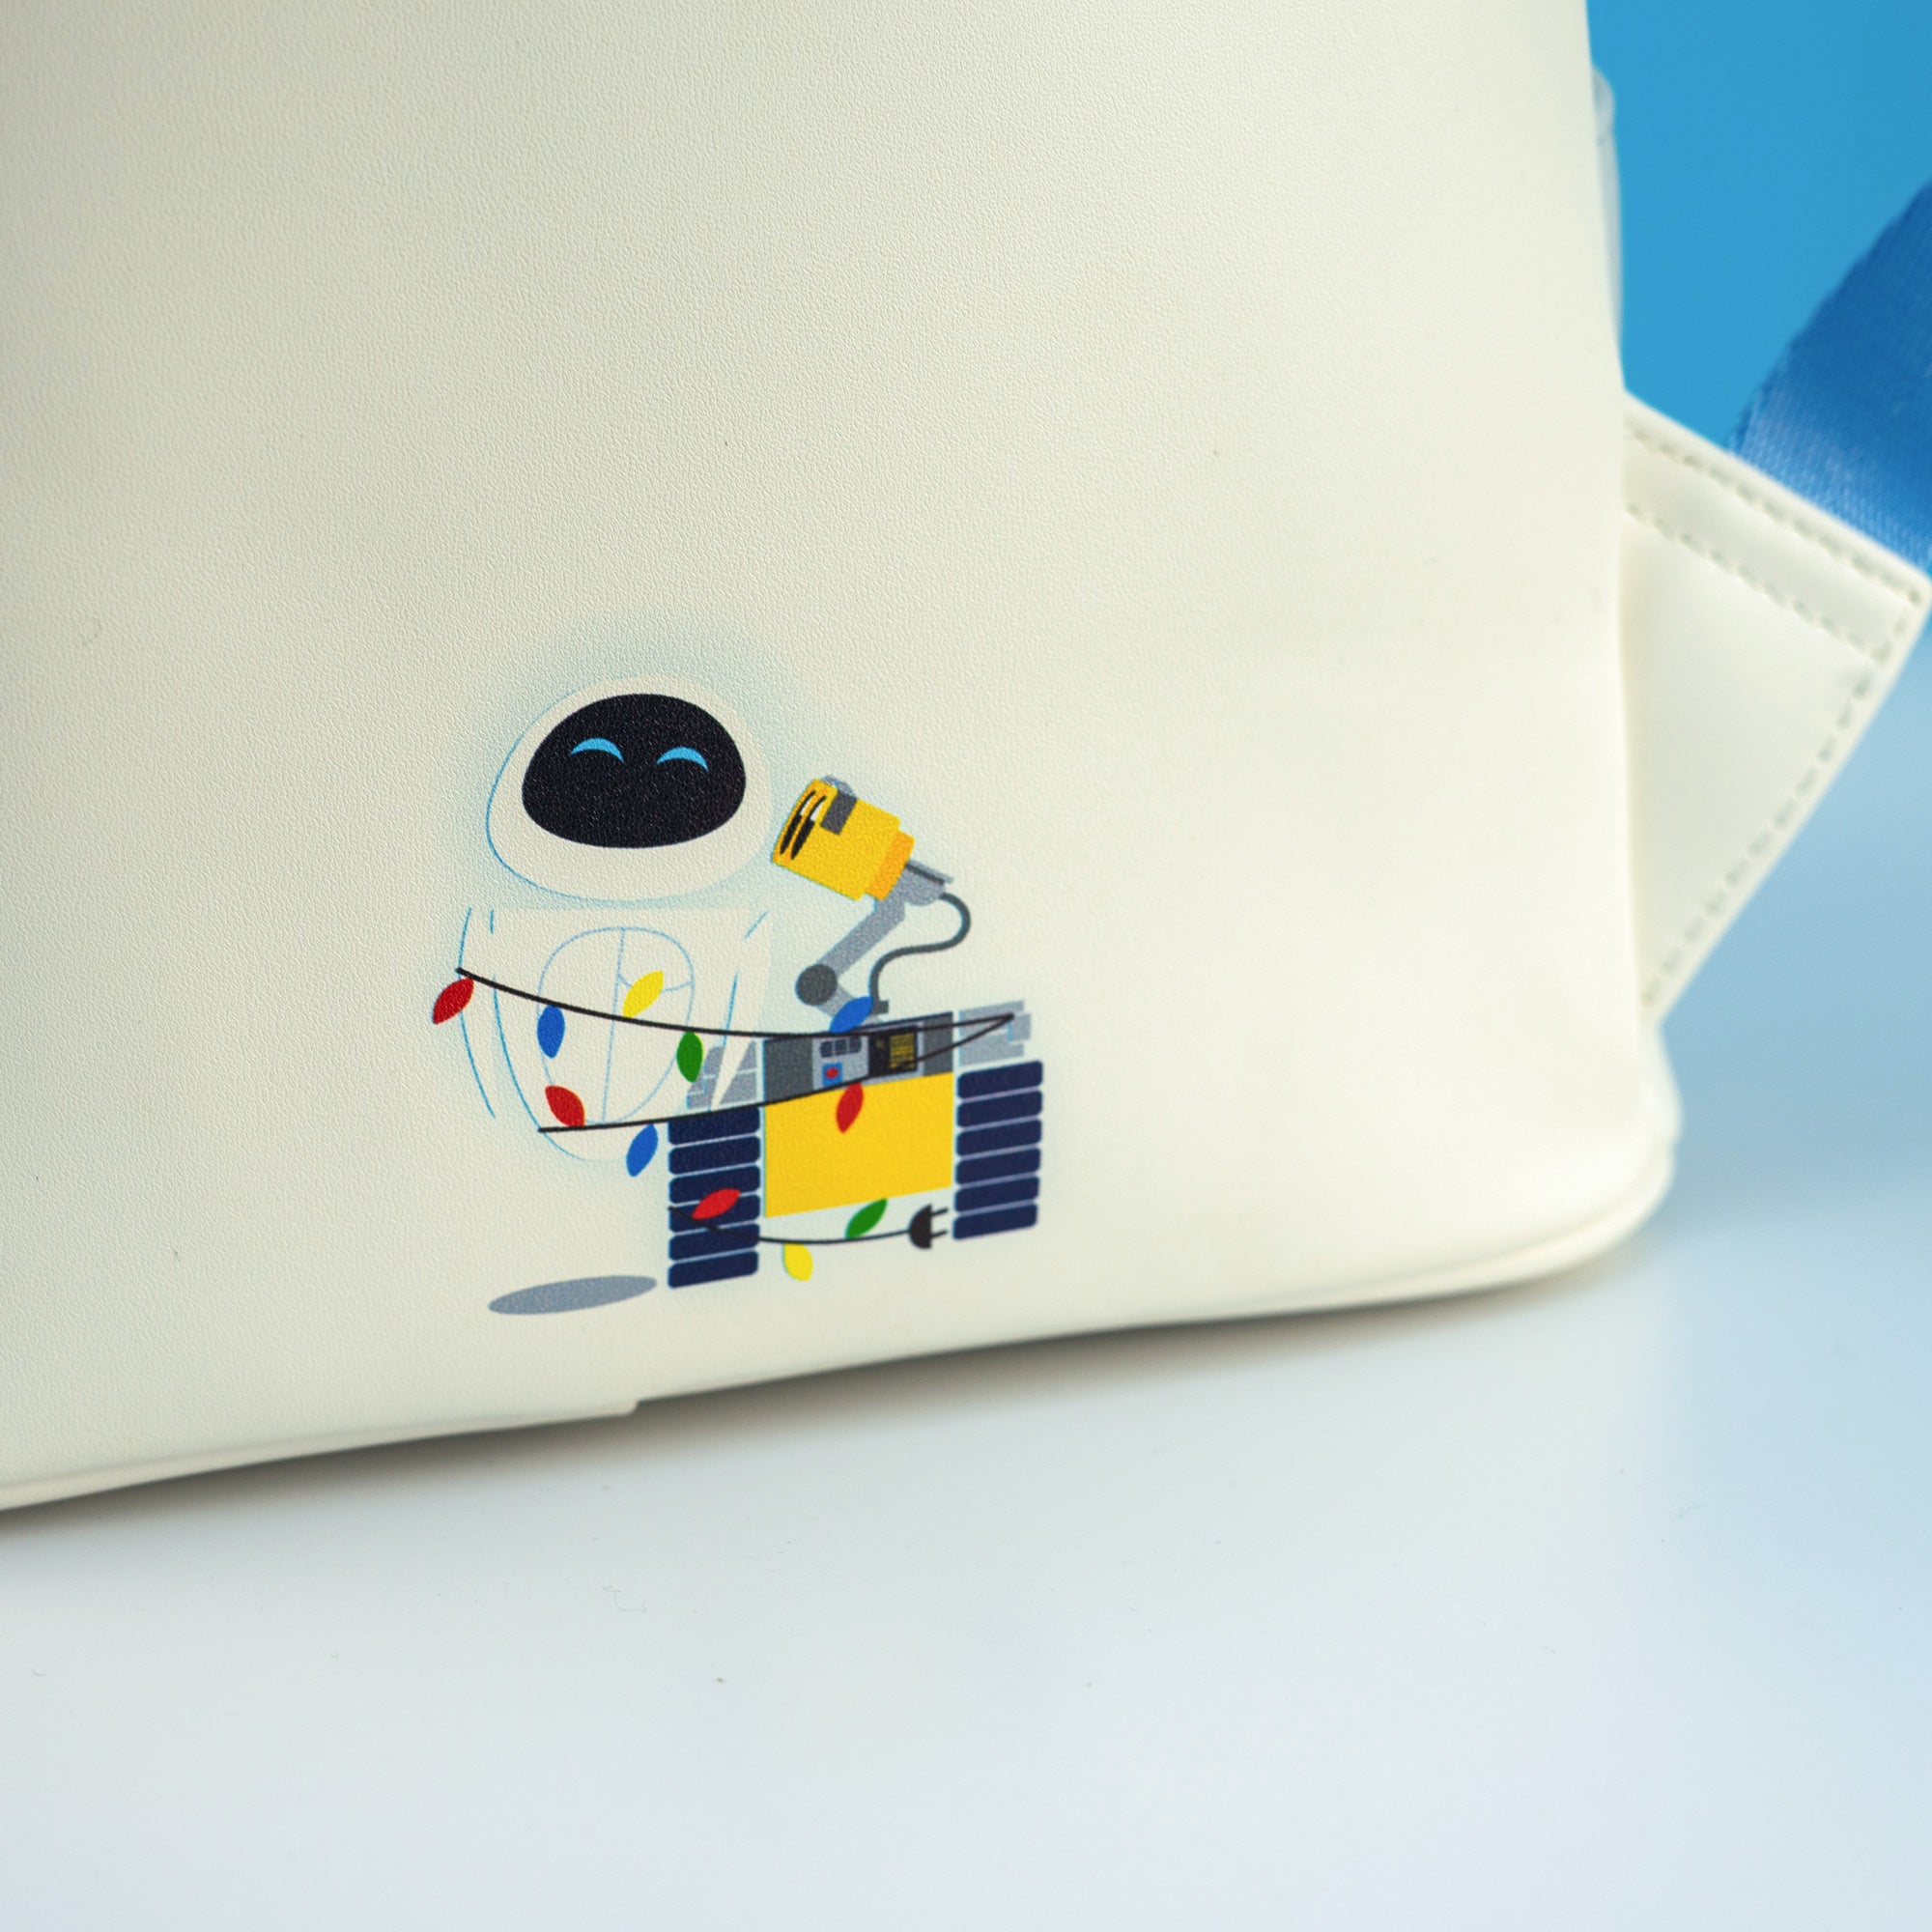 Loungefly x Pixar WALLE Eve Wearing Lights Cosplay Mini Backpack - GeekCore